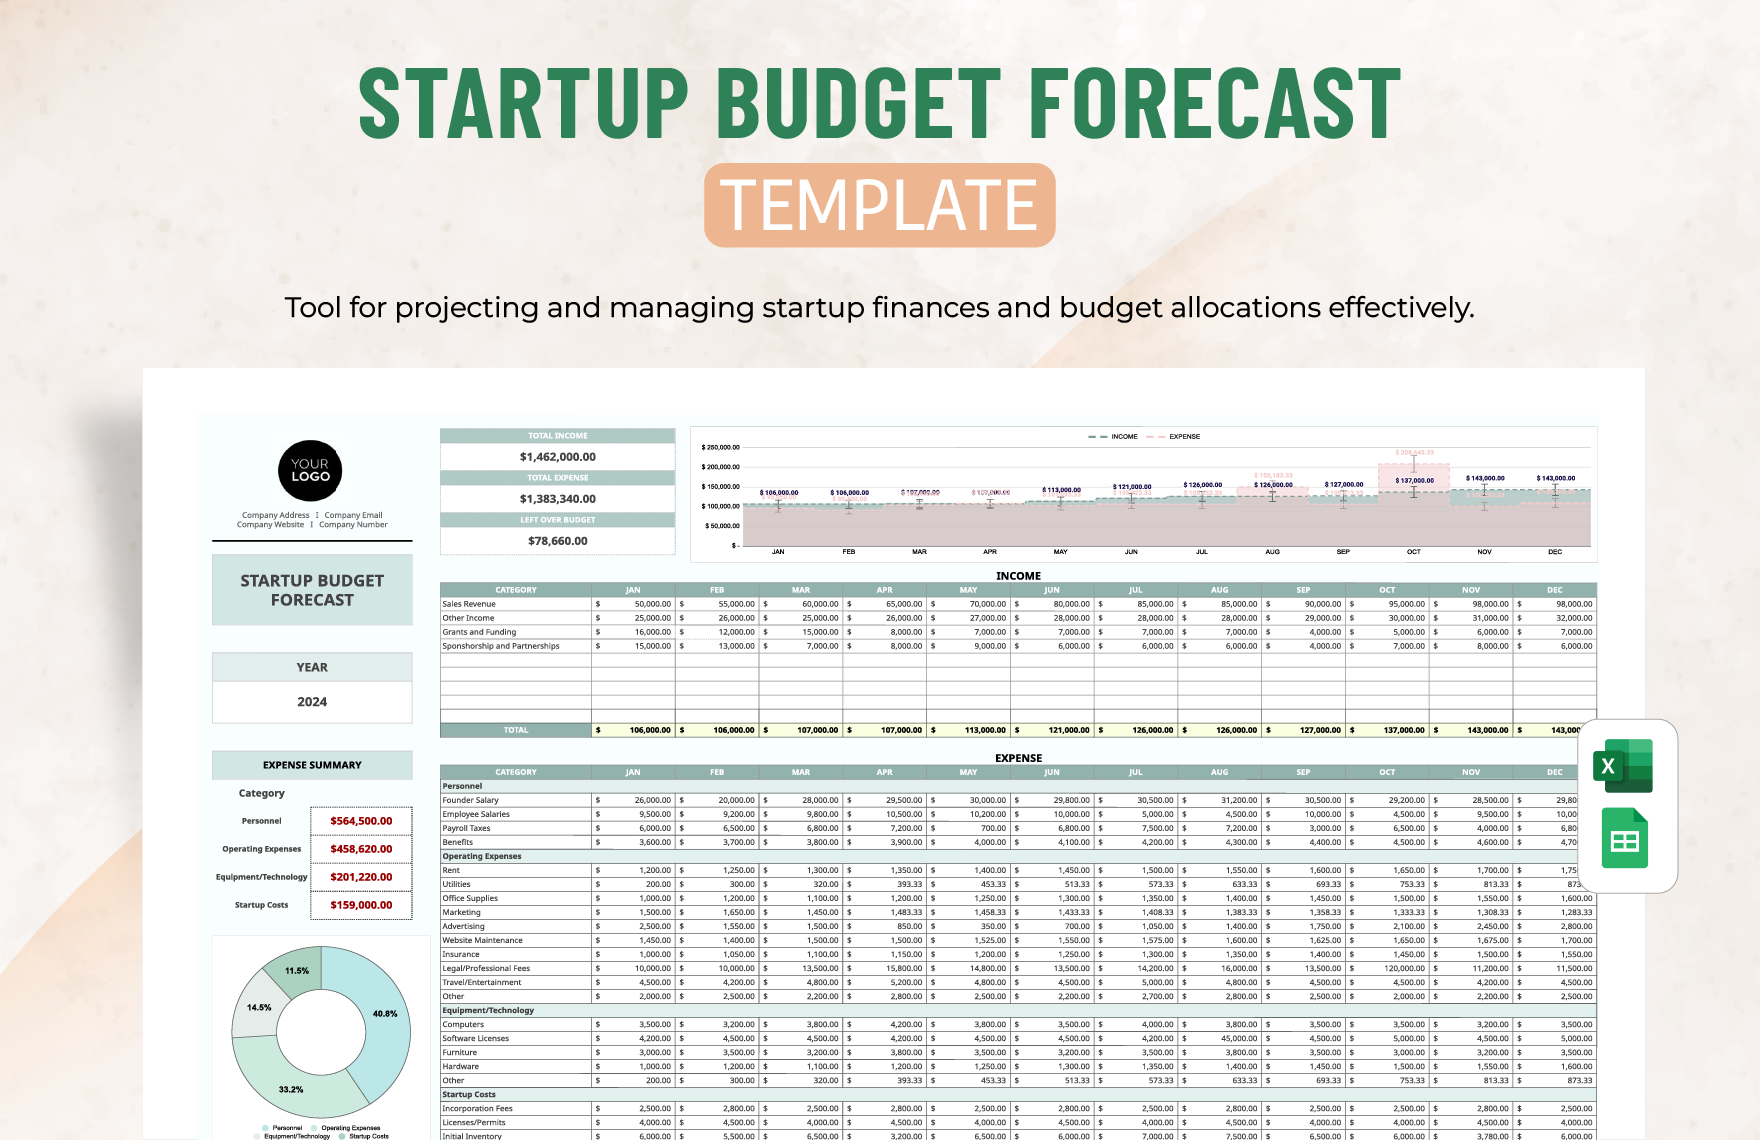 Startup Budget Forecast Template in Excel, Google Sheets